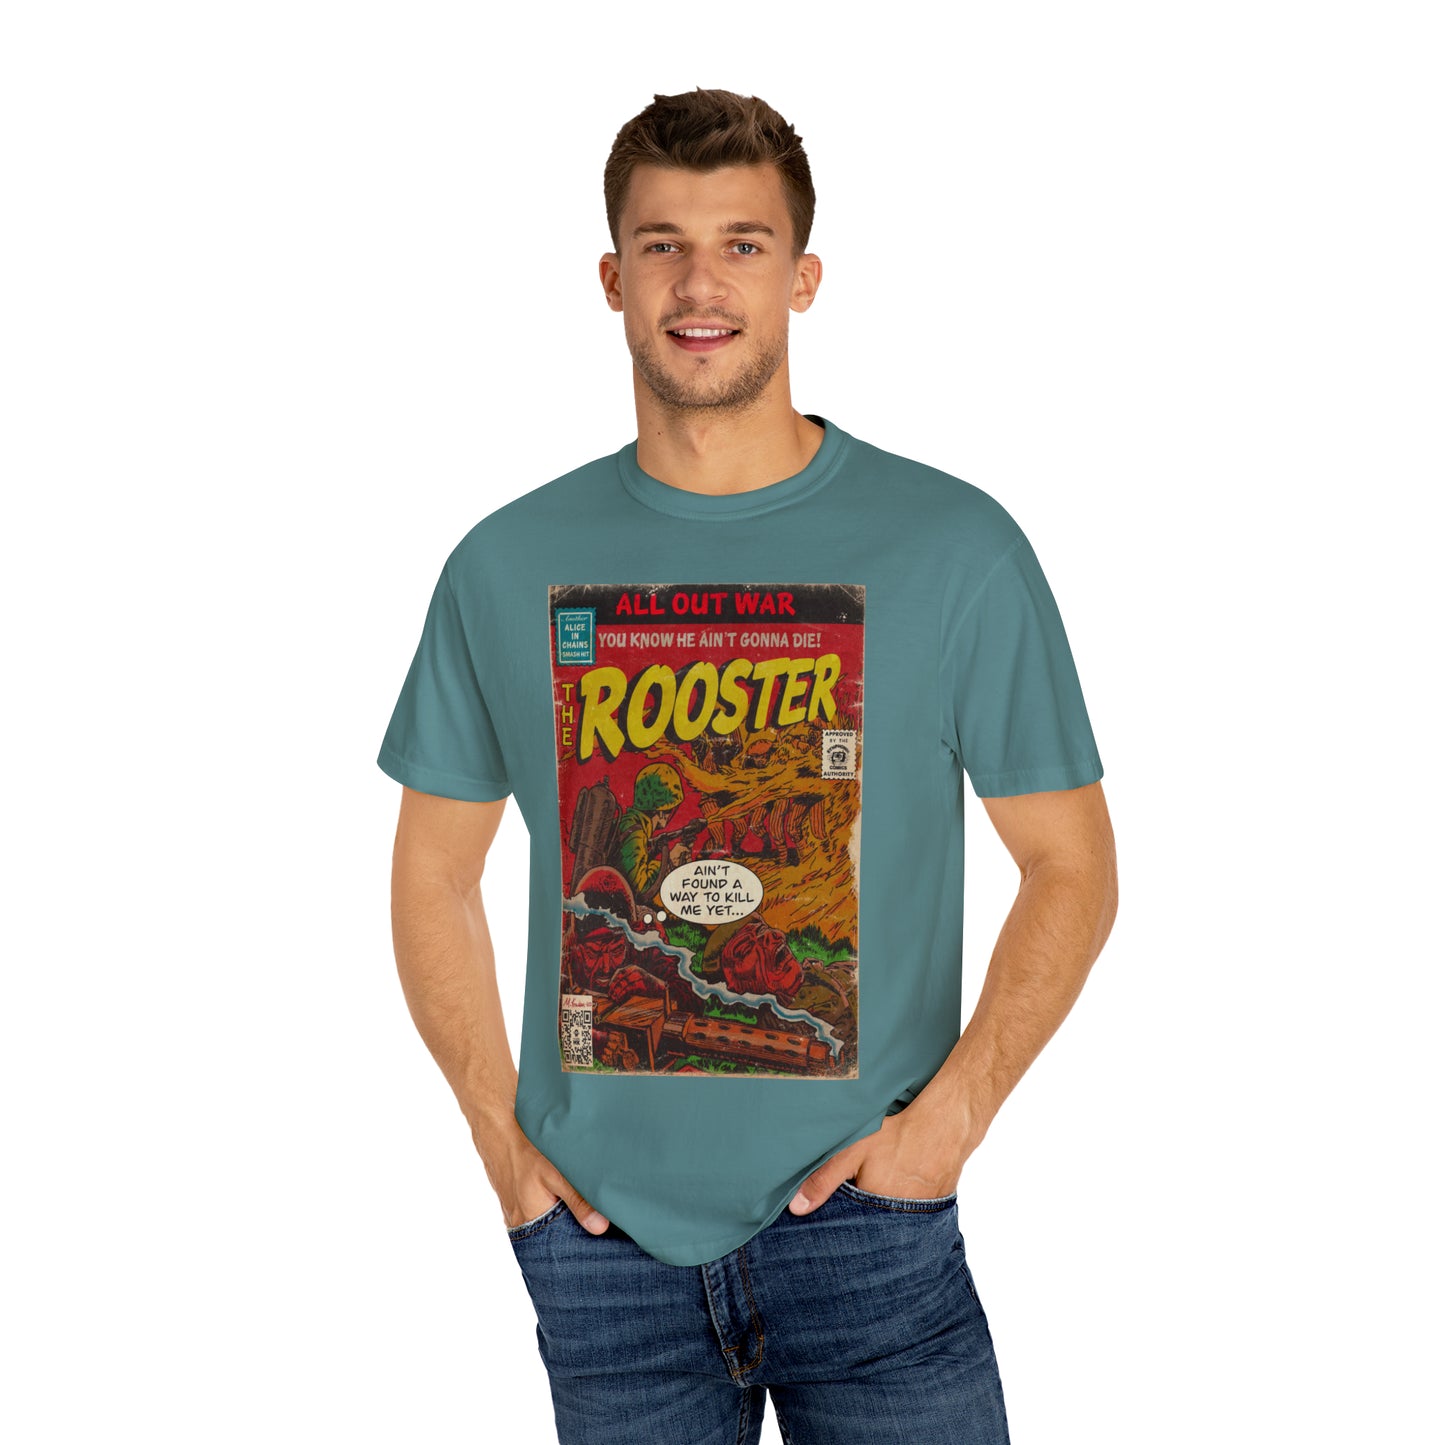 Alice In Chains - Rooster - Unisex Comfort Colors T-shirt